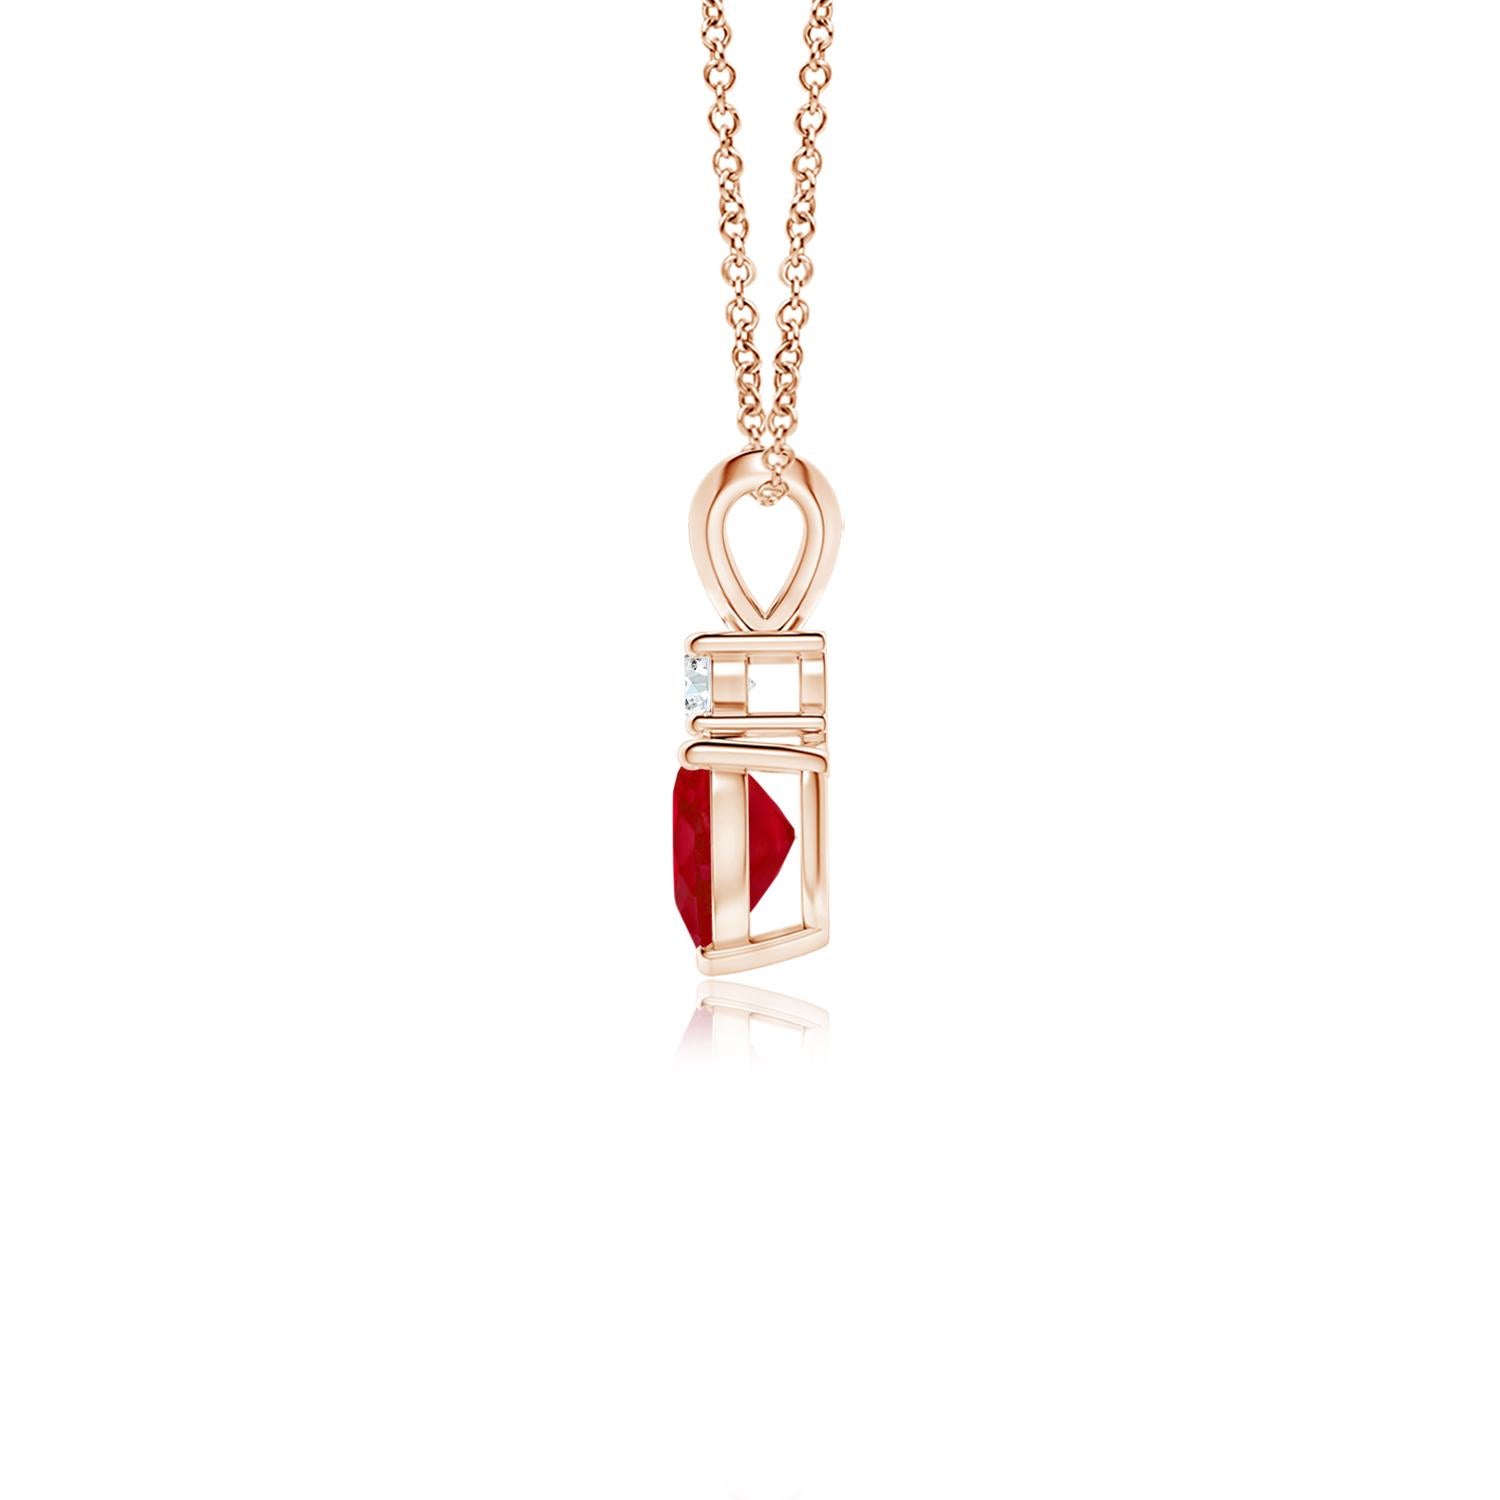 This heart-shaped ruby pendant in 14K rose gold is a beautiful symbol of love. The bold red gem is topped with a glittering round diamond and linked to a rabbit ear bale.
Ruby is the birthstone for July and the traditional gemstone gift for the 15th